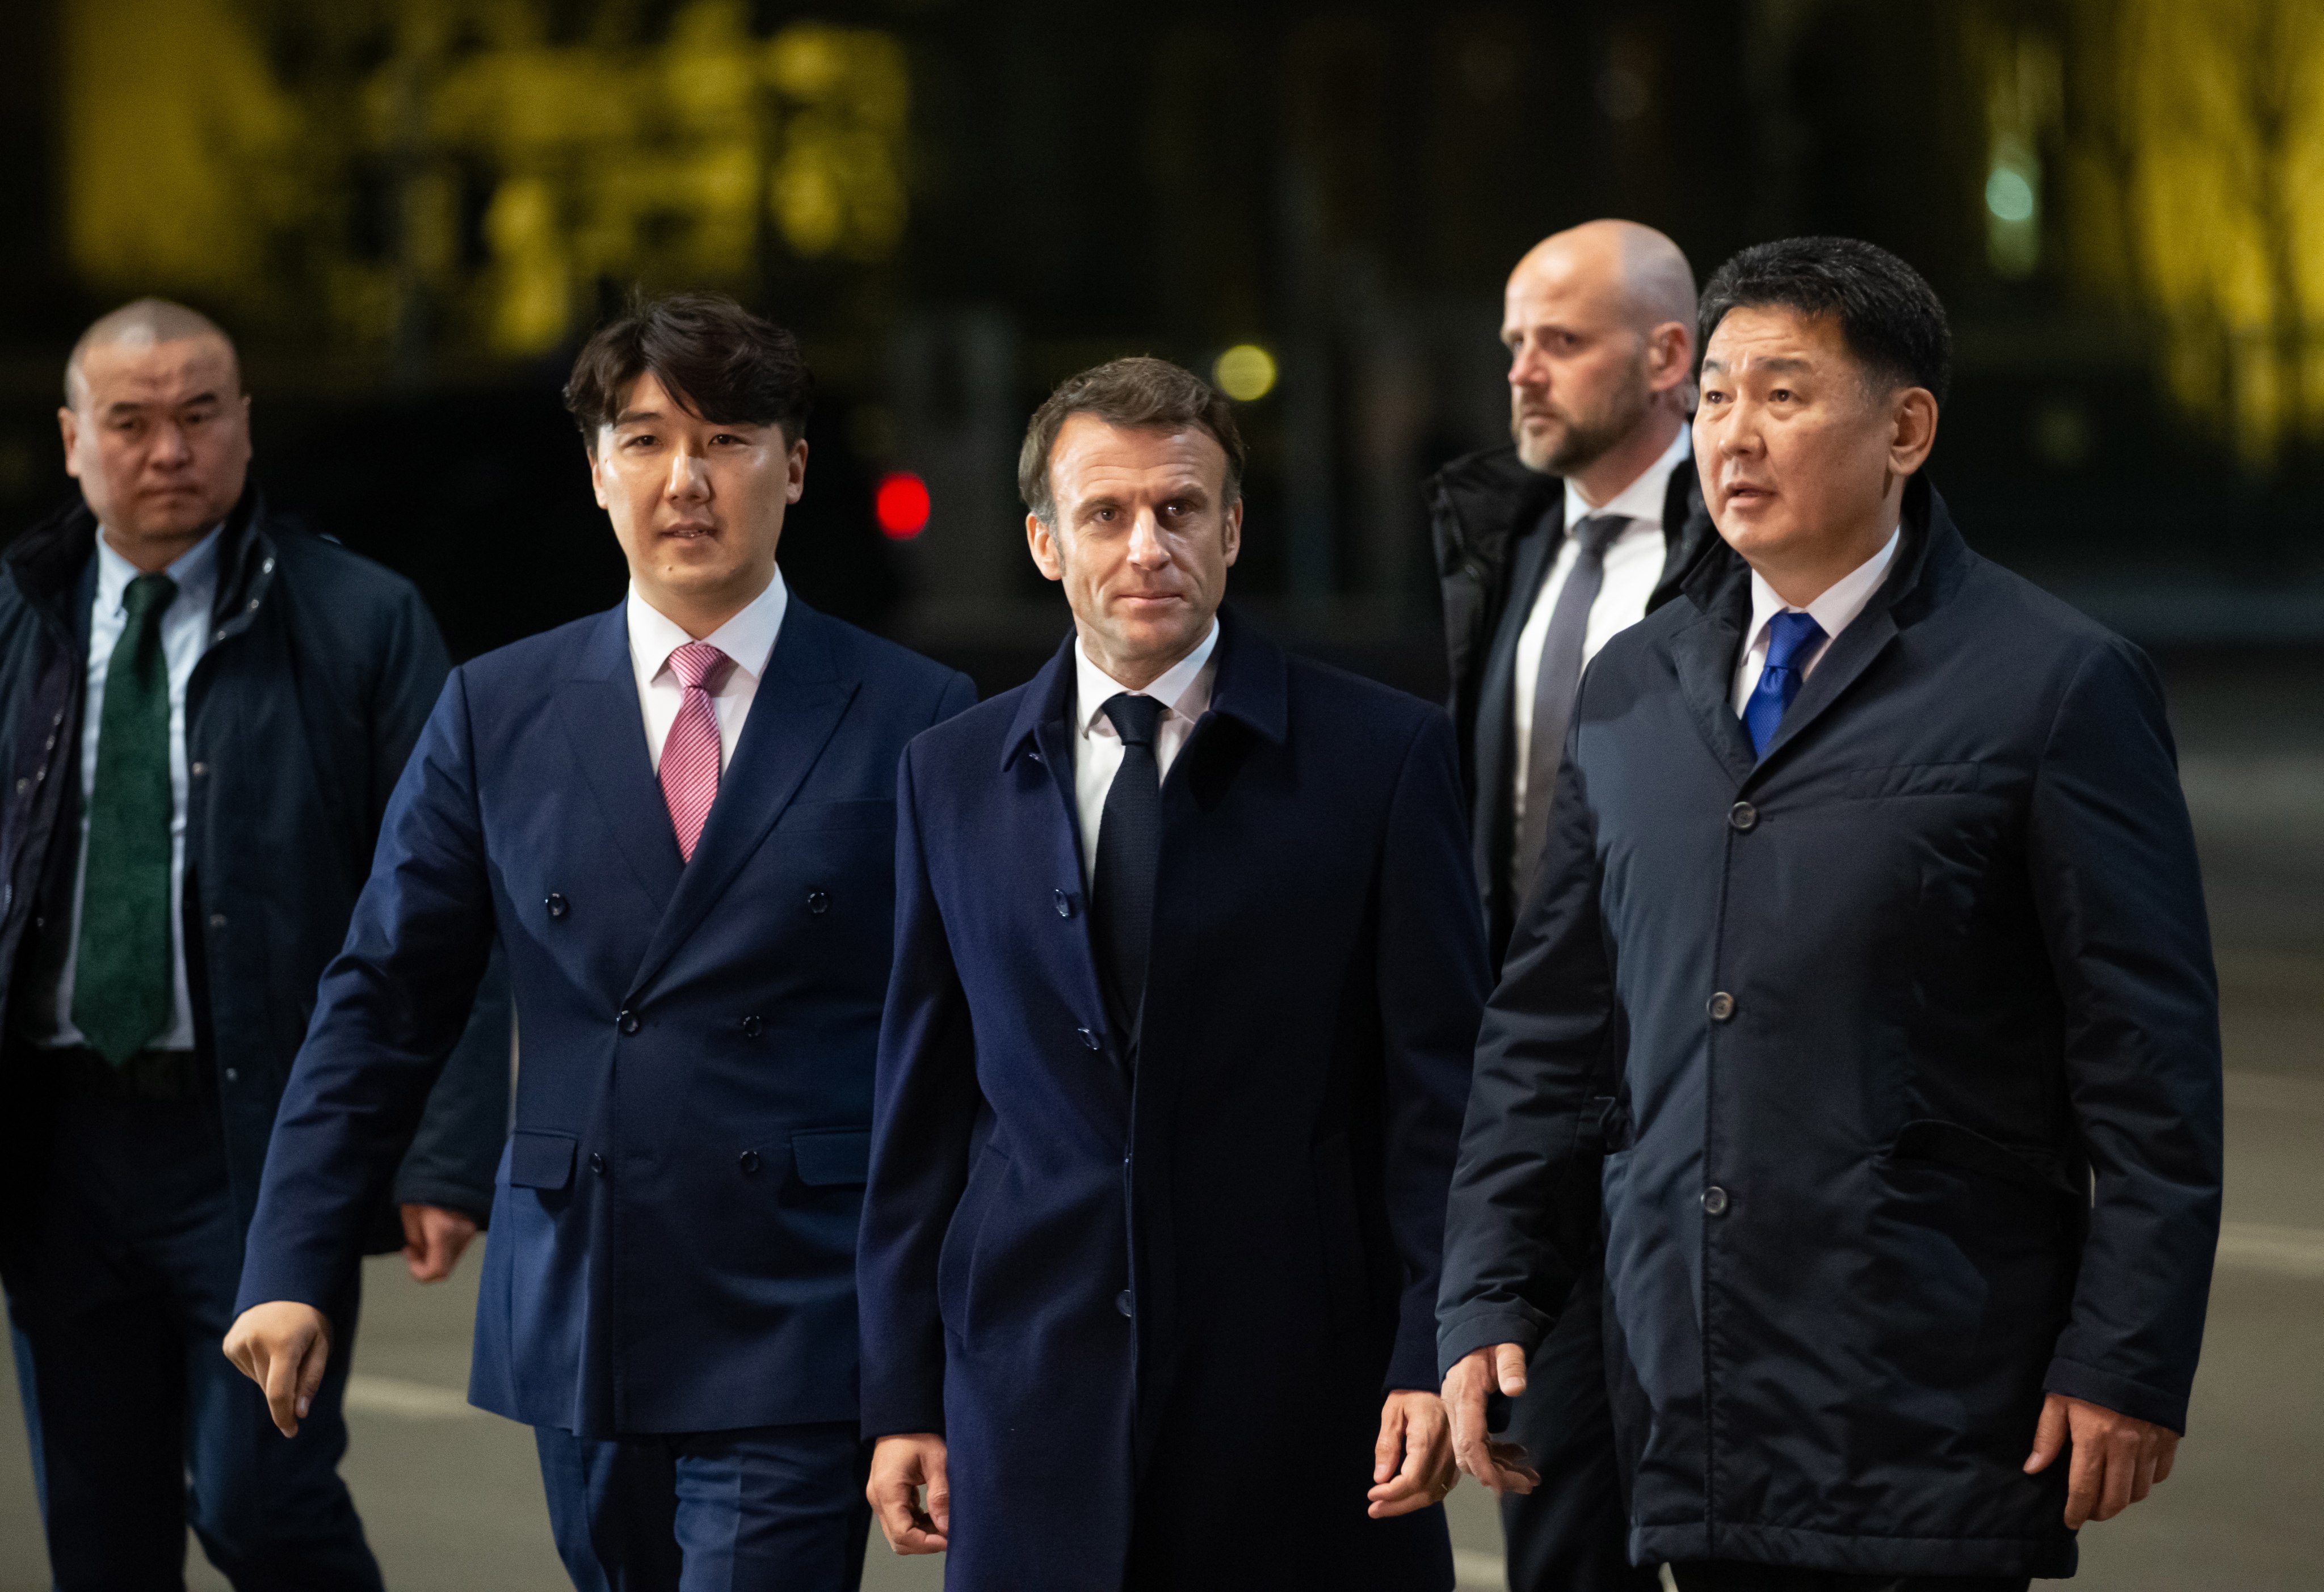 Mongolia’s President Ukhnaagiin Khurelsukh, left, and French President Emmanuel Macron, centre, during a visit to Genghis Khan Museum in Ulaanbaatar, Mongolia on Sunday. Photo:  EPA-EFE